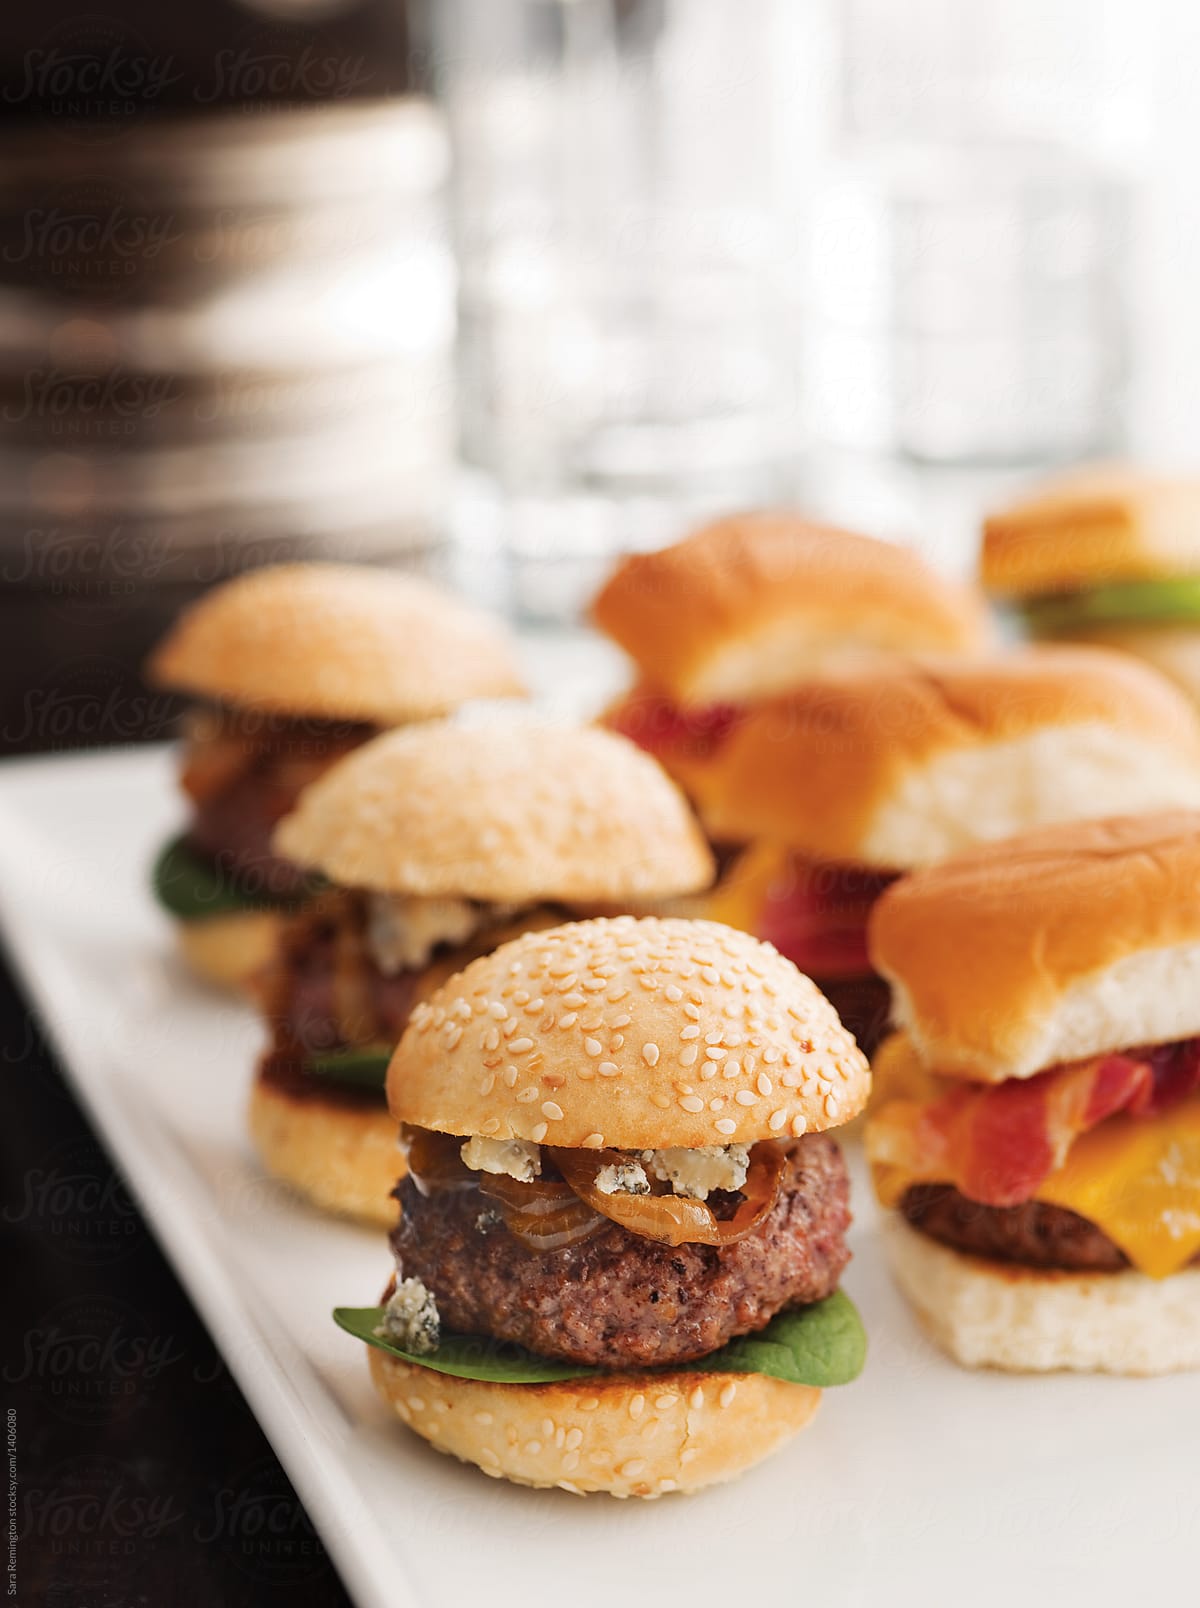 Mini Burgers and Sliders At Party